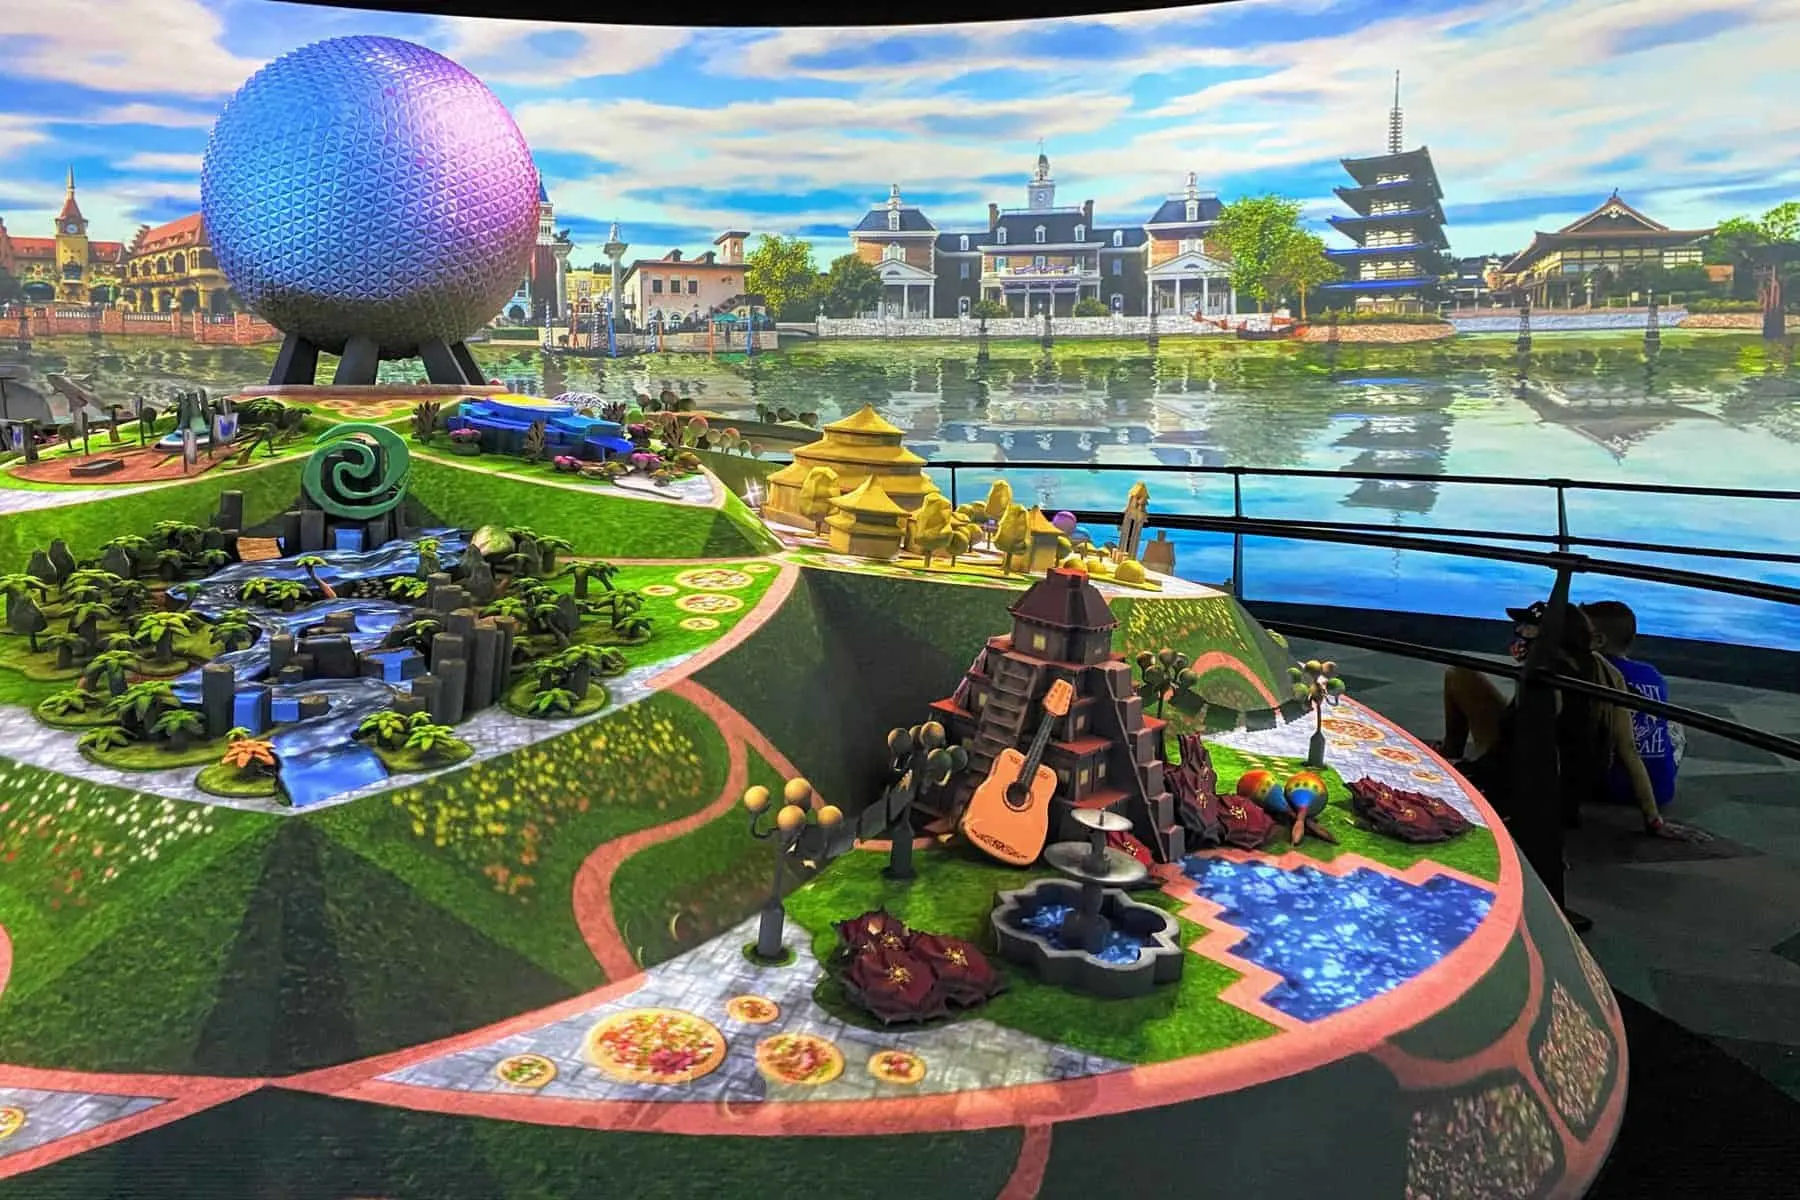 Epcot updates: what’s still coming (and what isn’t)